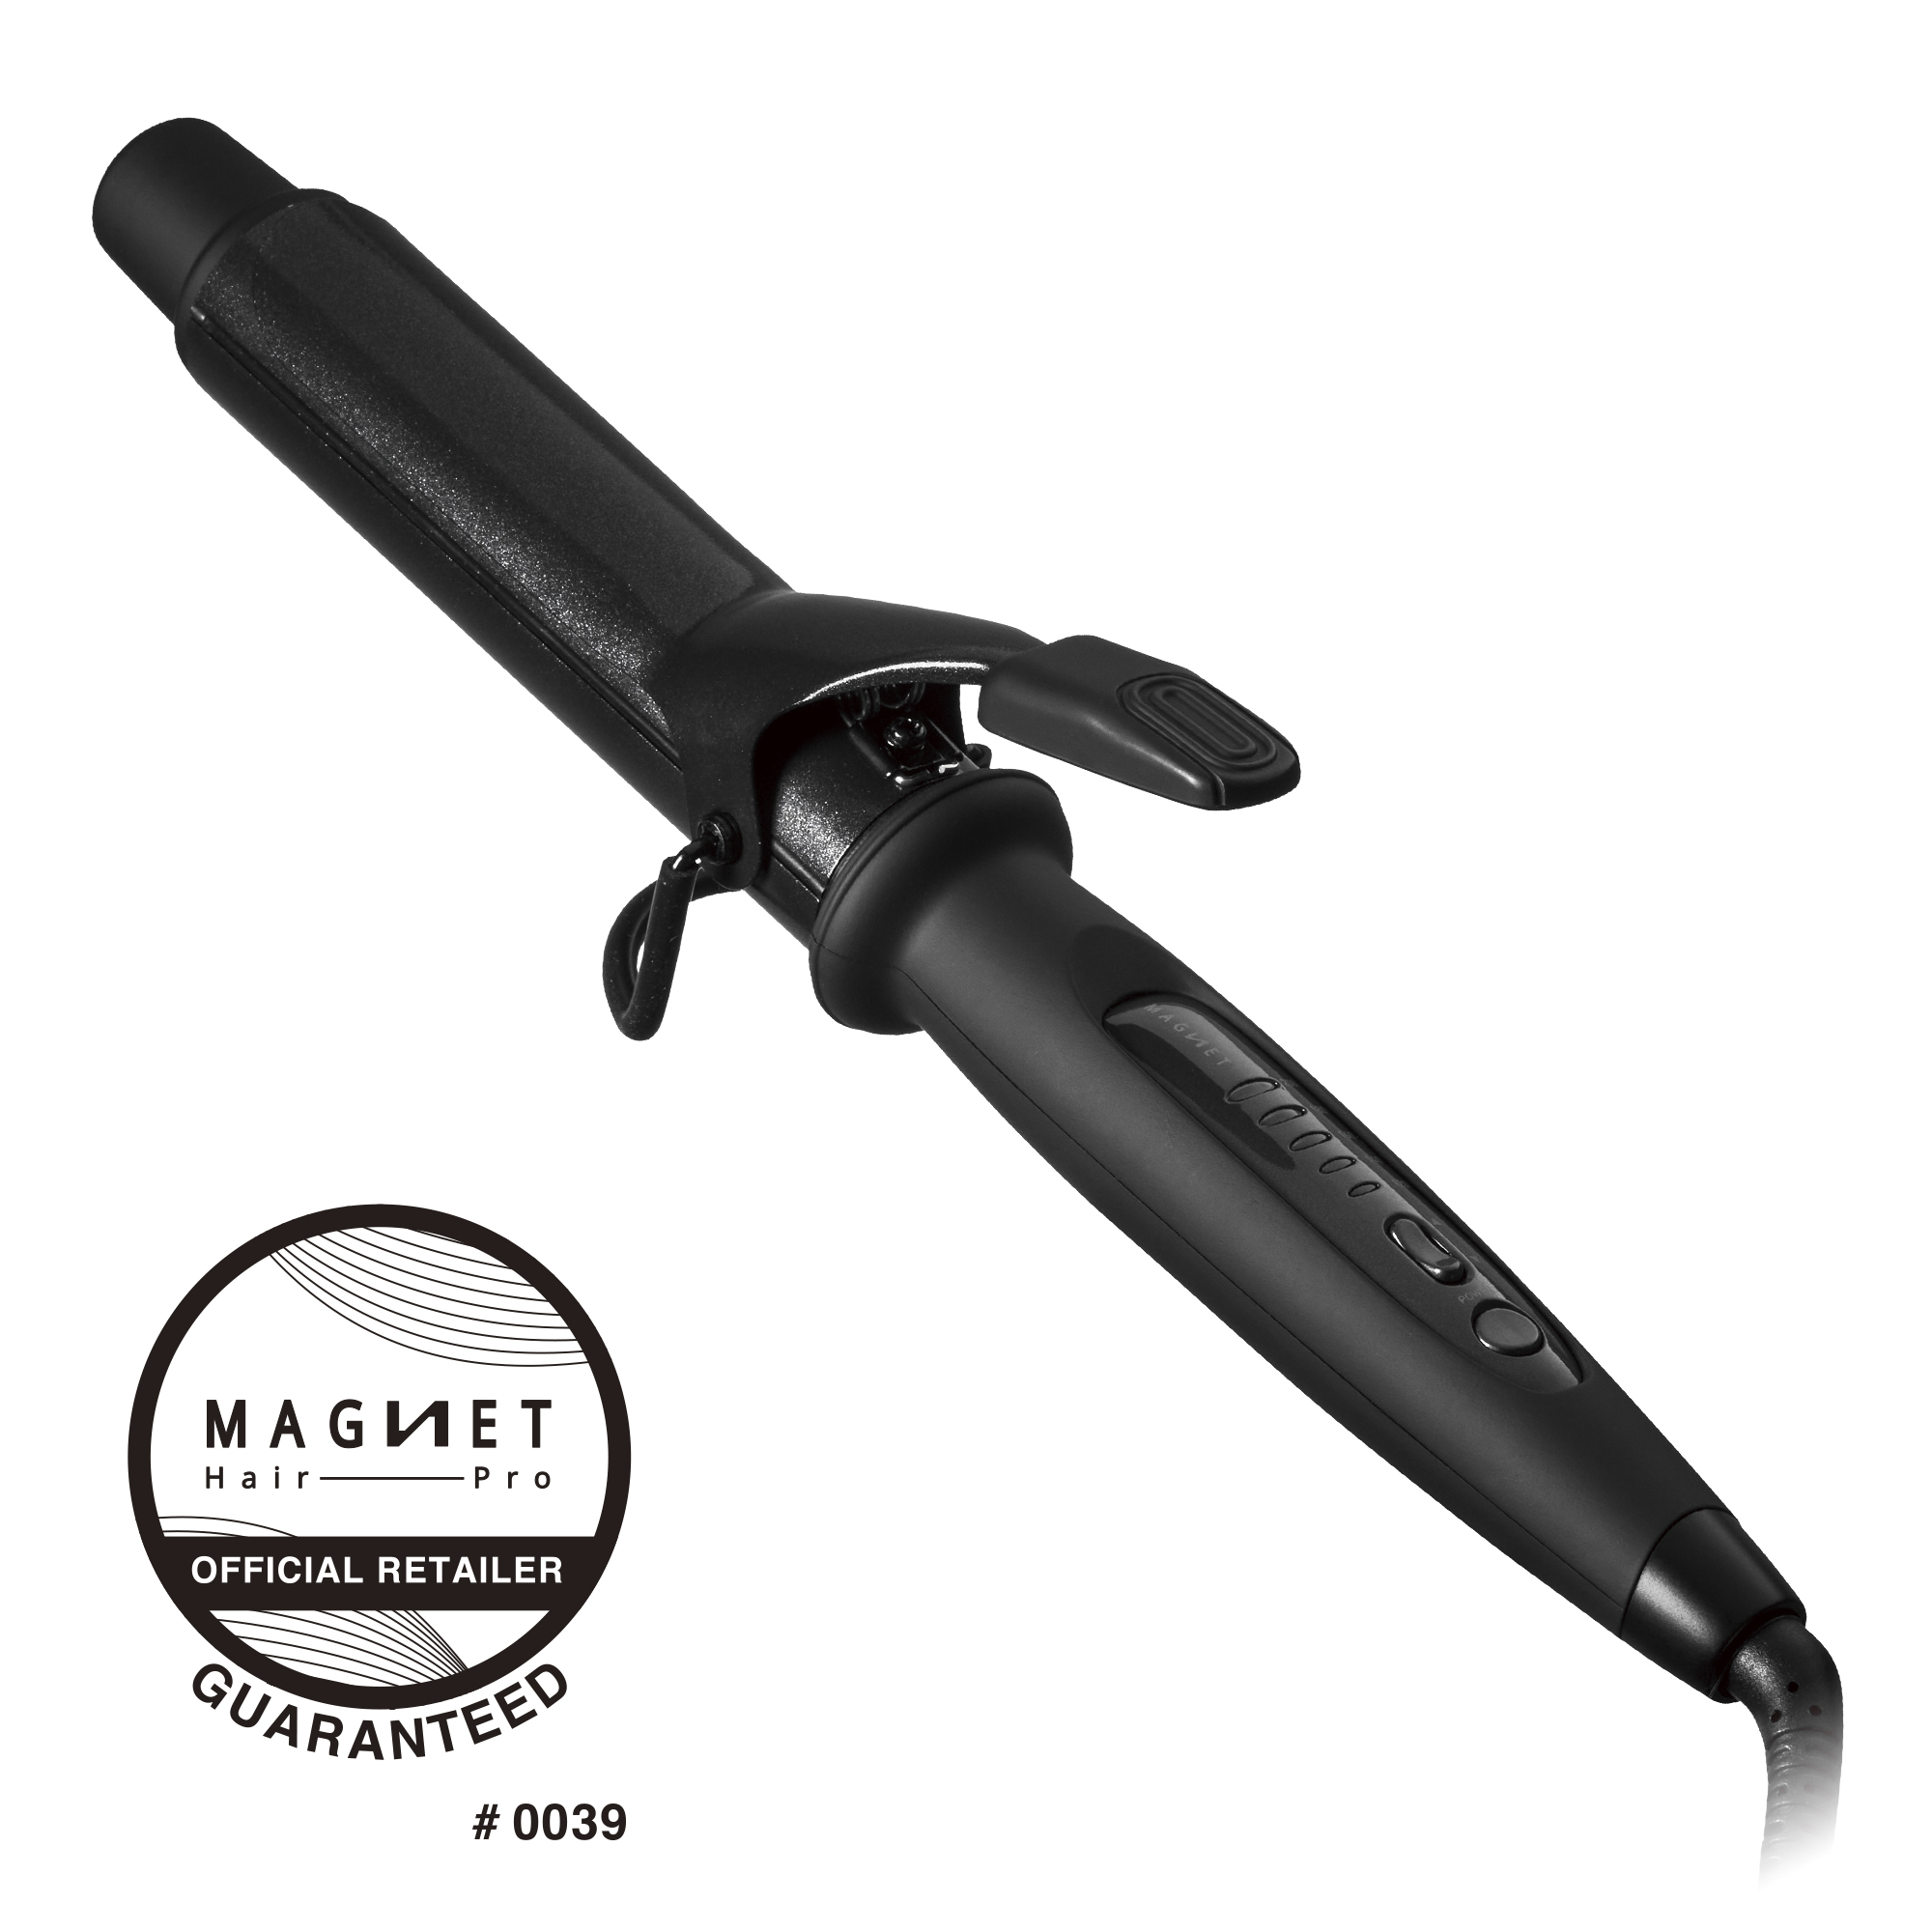 HOLISTIC cures MAGNETHairPro CURL IRON32mm